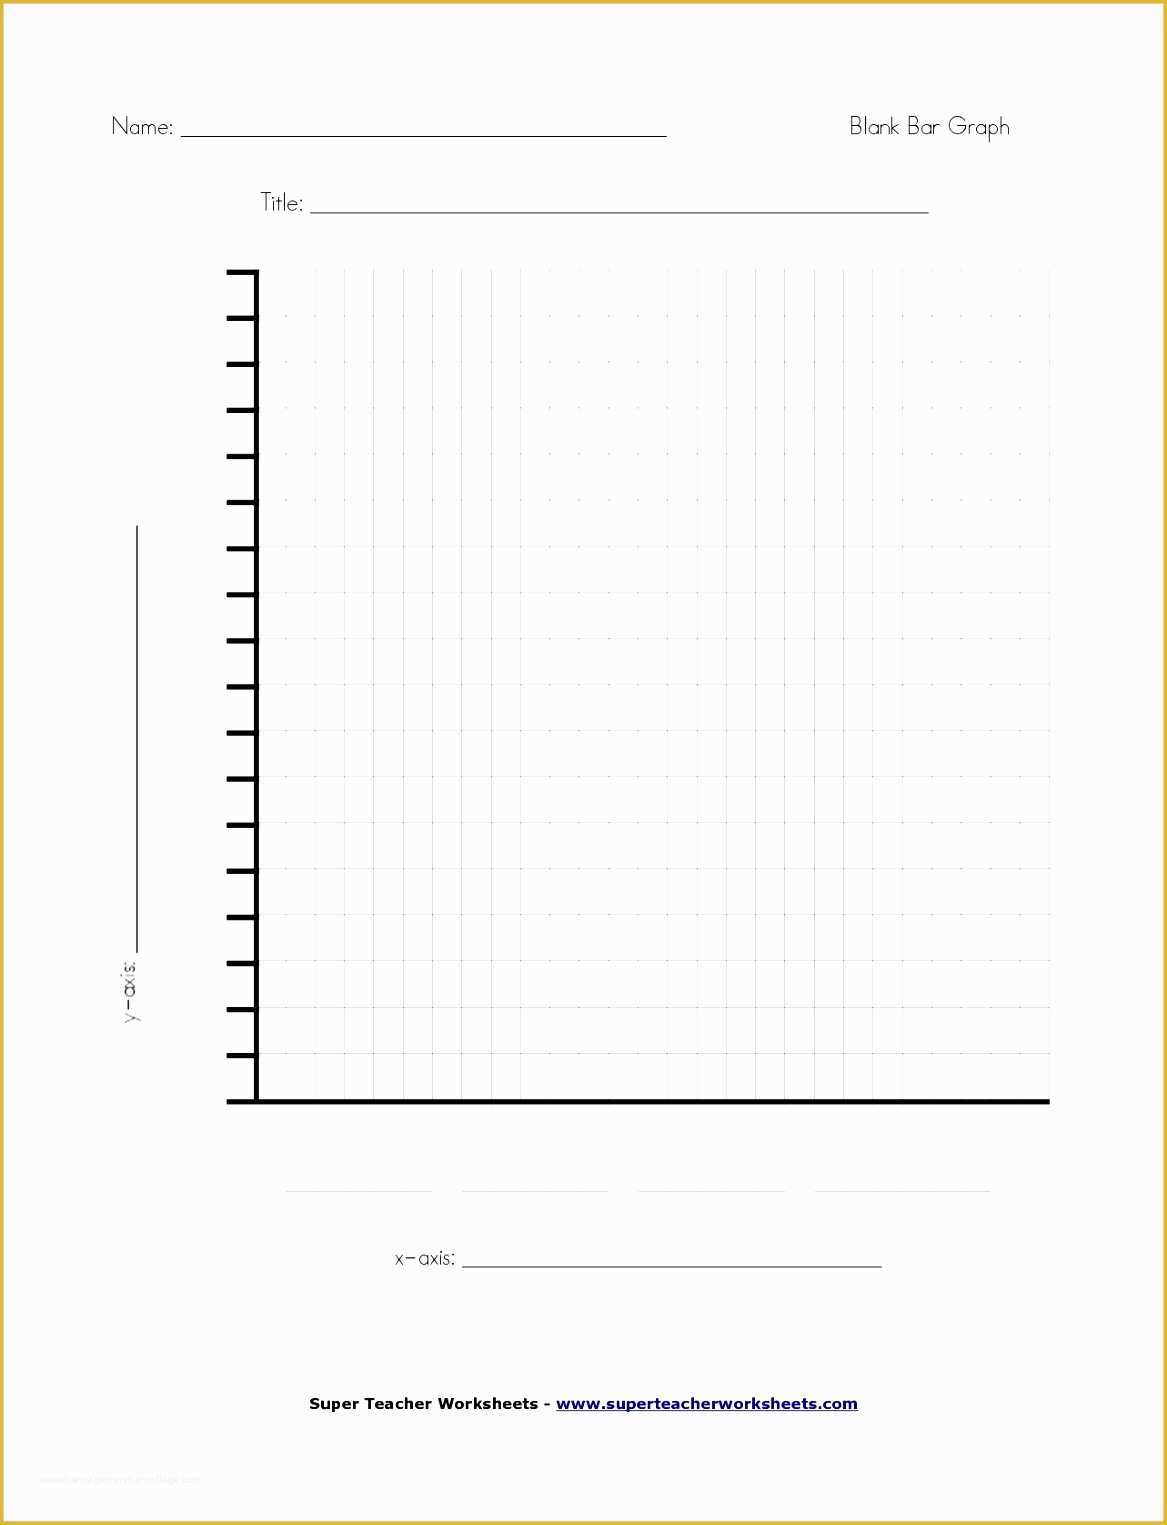 Free Graph Templates Of 7 Excel Bar Graph Templates Exceltemplates Exceltemplates